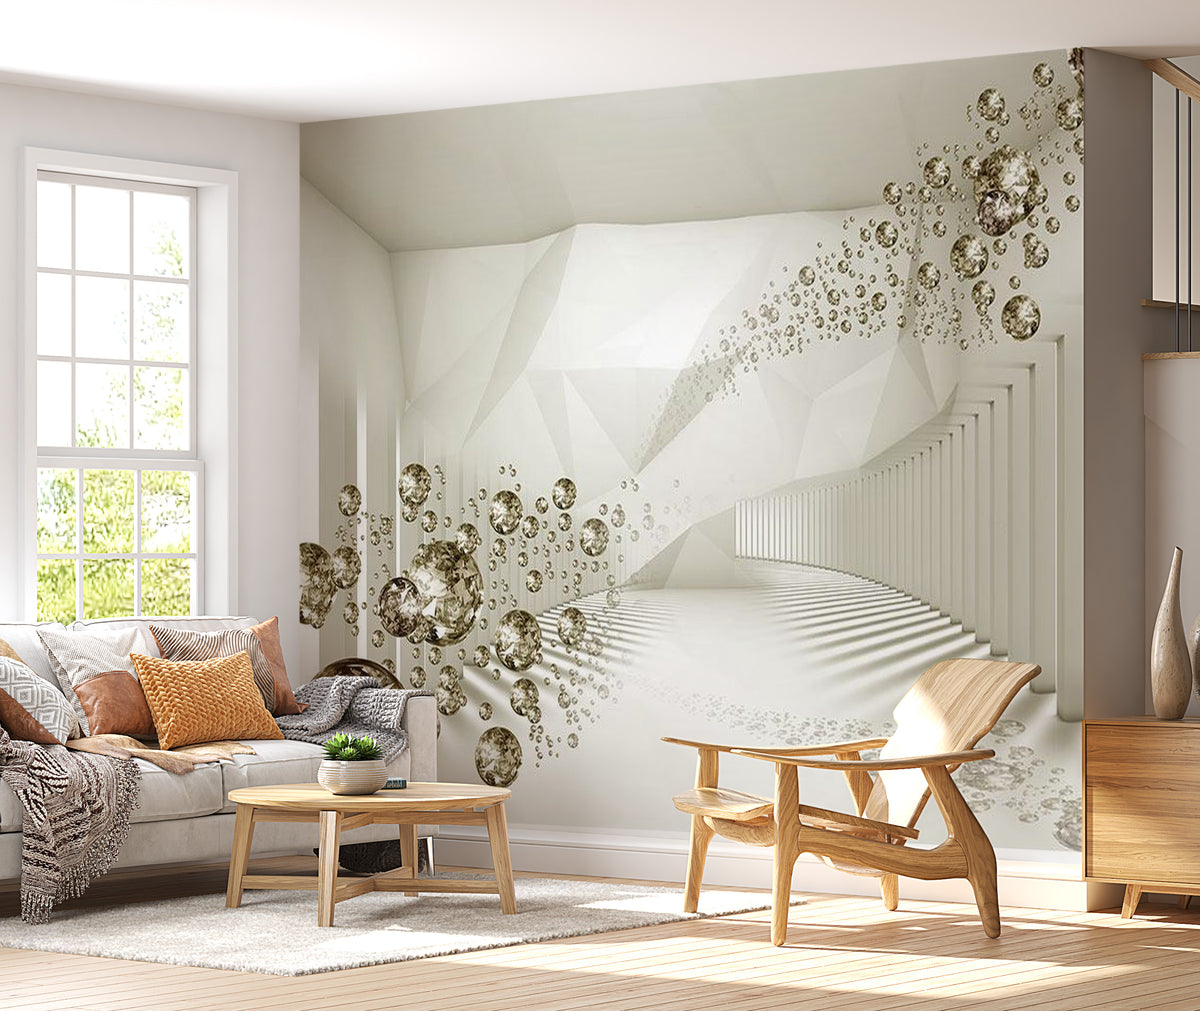 Best Selling Murals – - Wall Shipping US Fast Wallpaper Free Tiptophomedecor